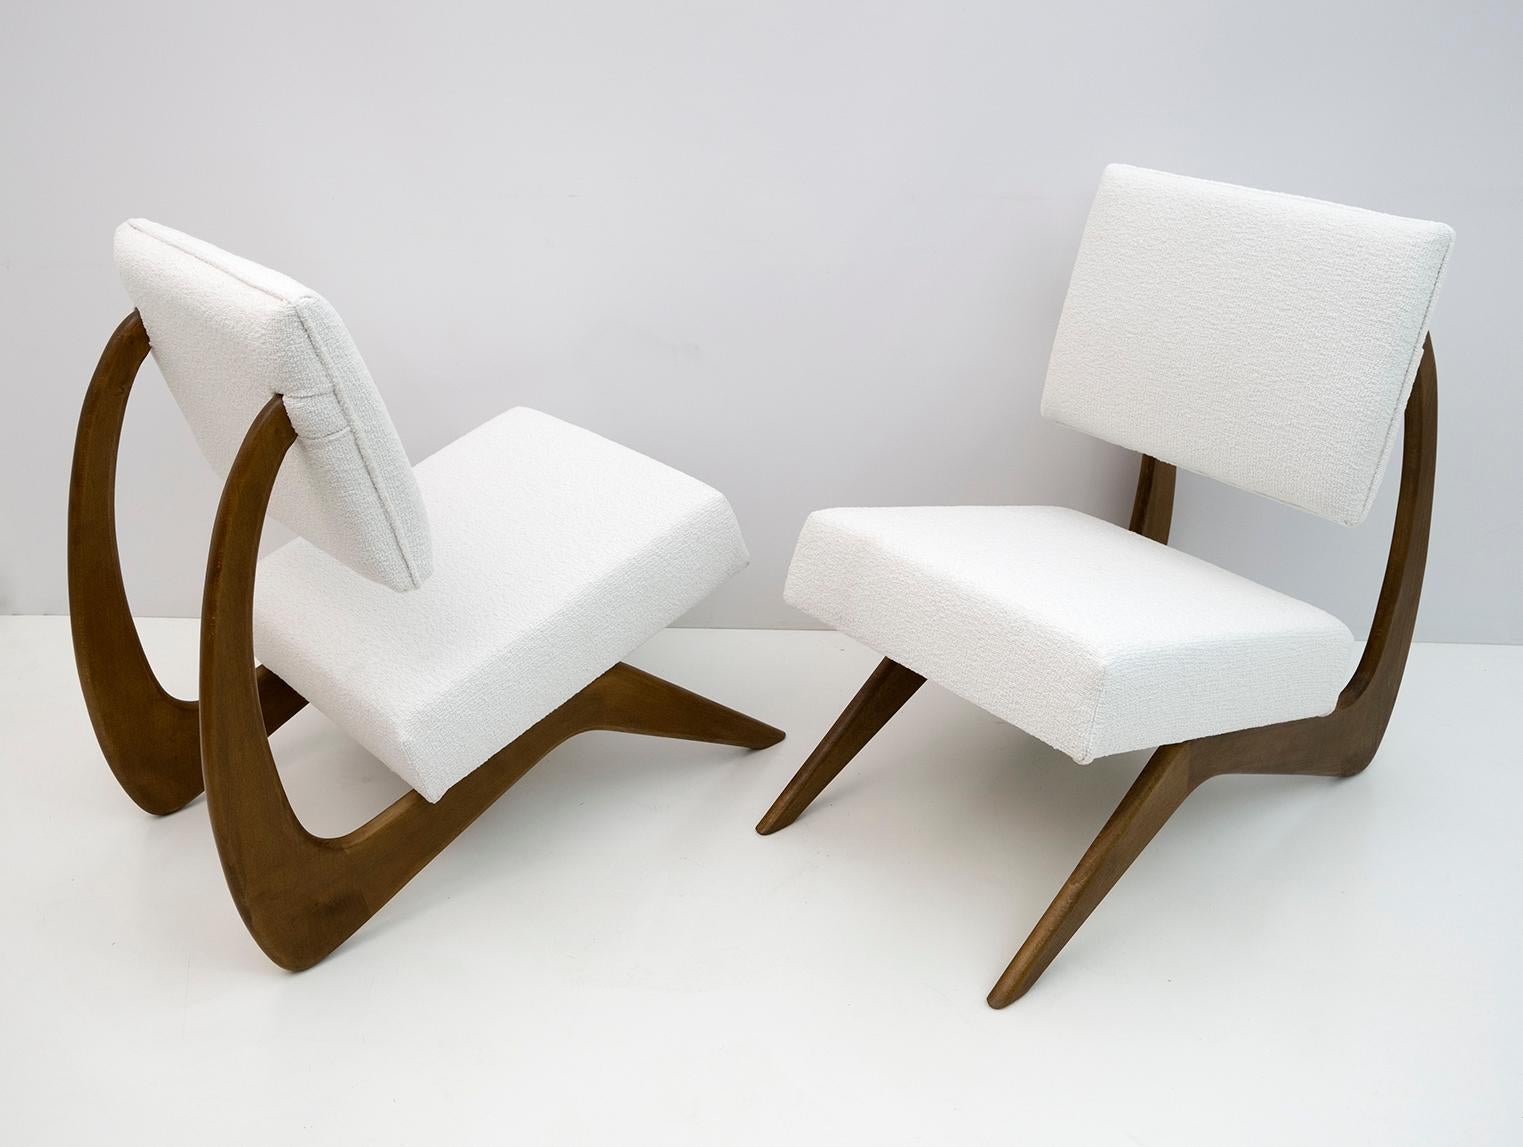 Pair of armchairs designed by the American designer Adrian Pearsall. The frame of these cocktail lounge chairs is made of walnut wood in a beautiful curved shape and upholstered in white chenille fabric. The armchairs have been restored and